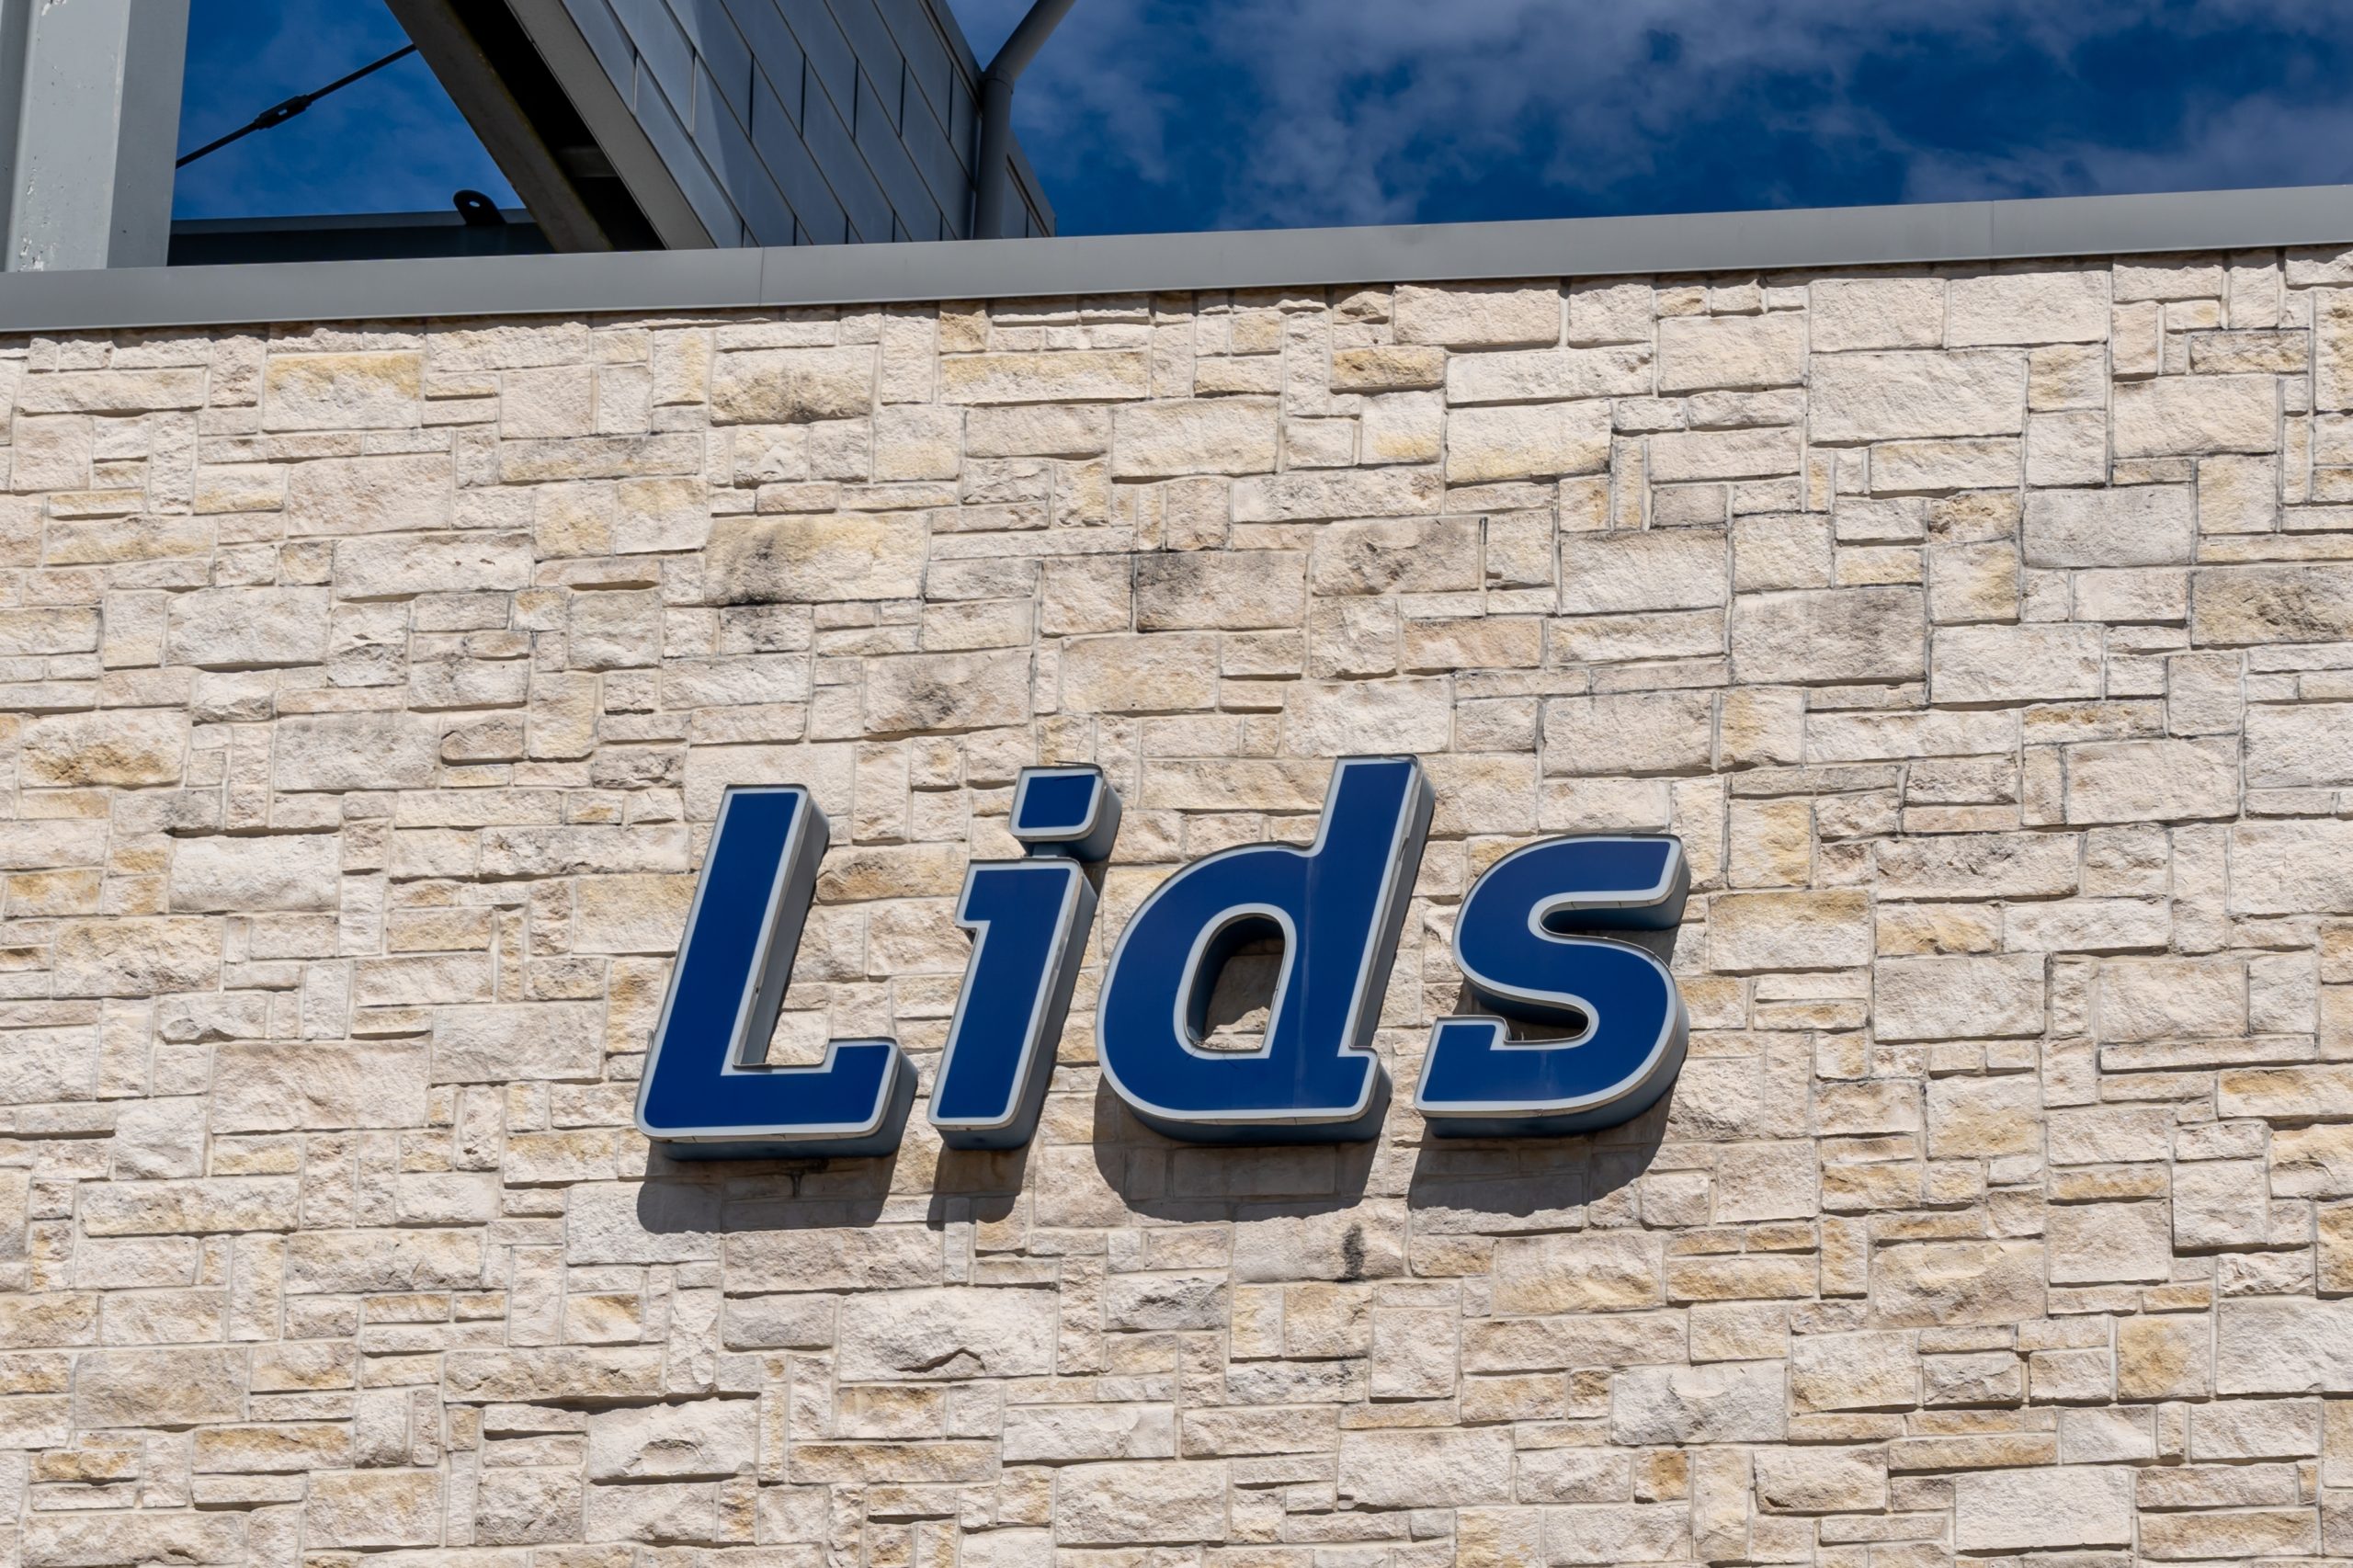 Lids' President Britten Maughan on the retailer's U.K. expansion